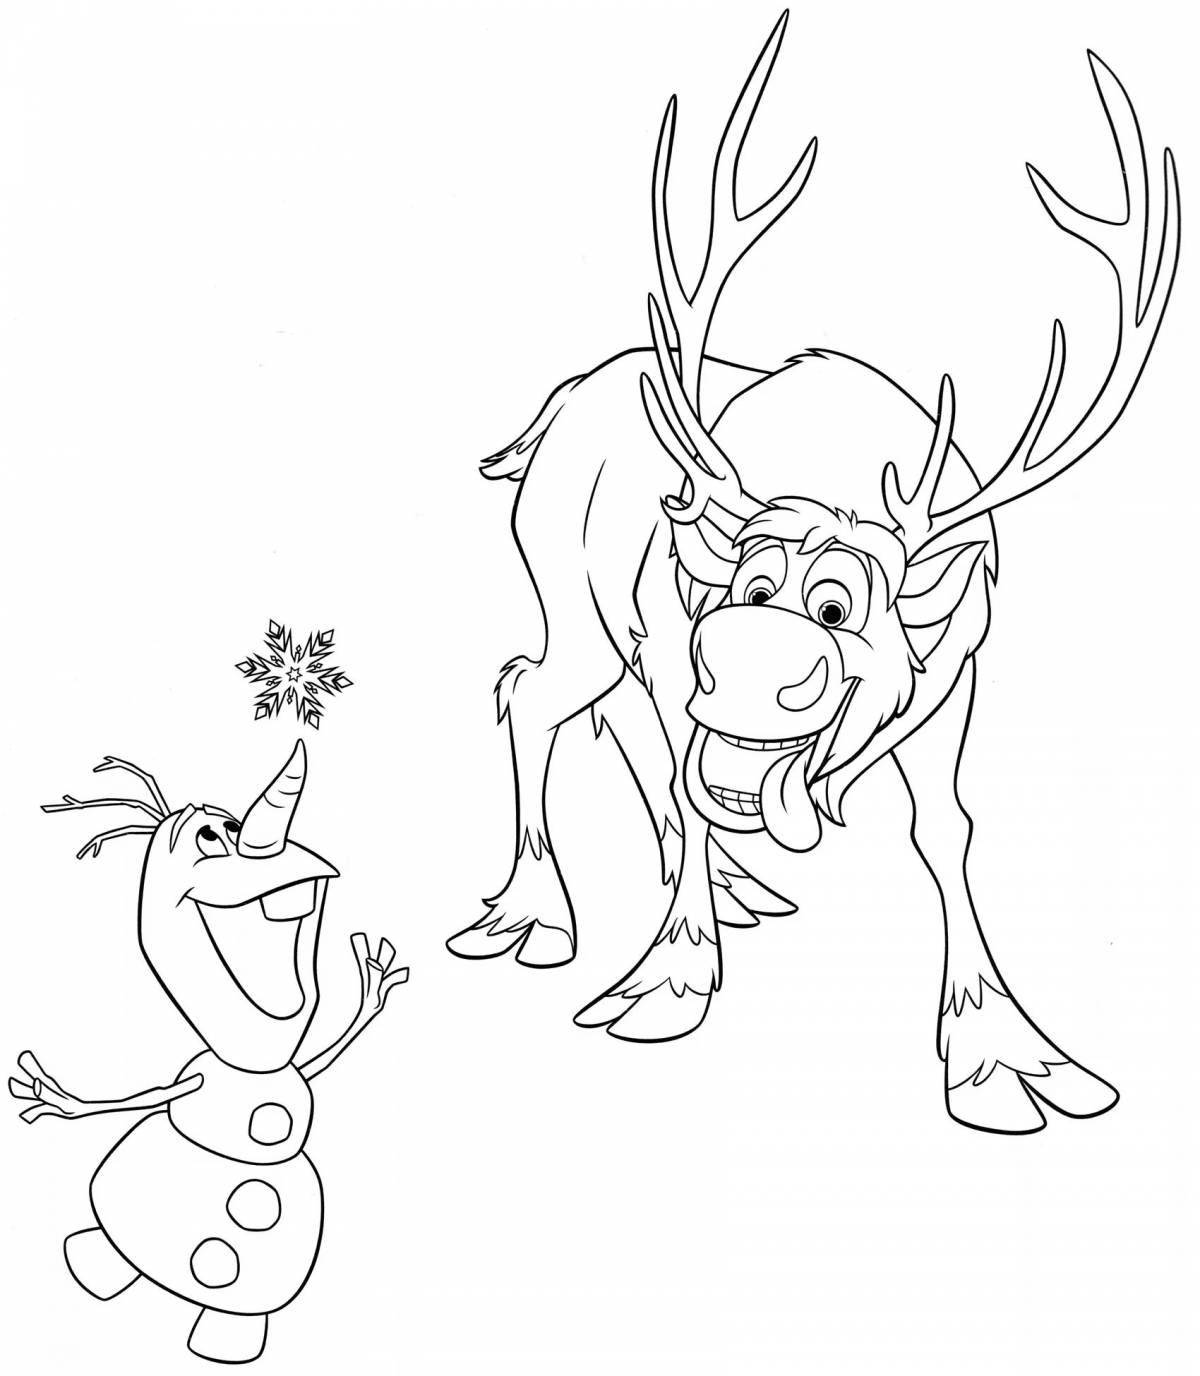 Elsa and olaf's fancy coloring book